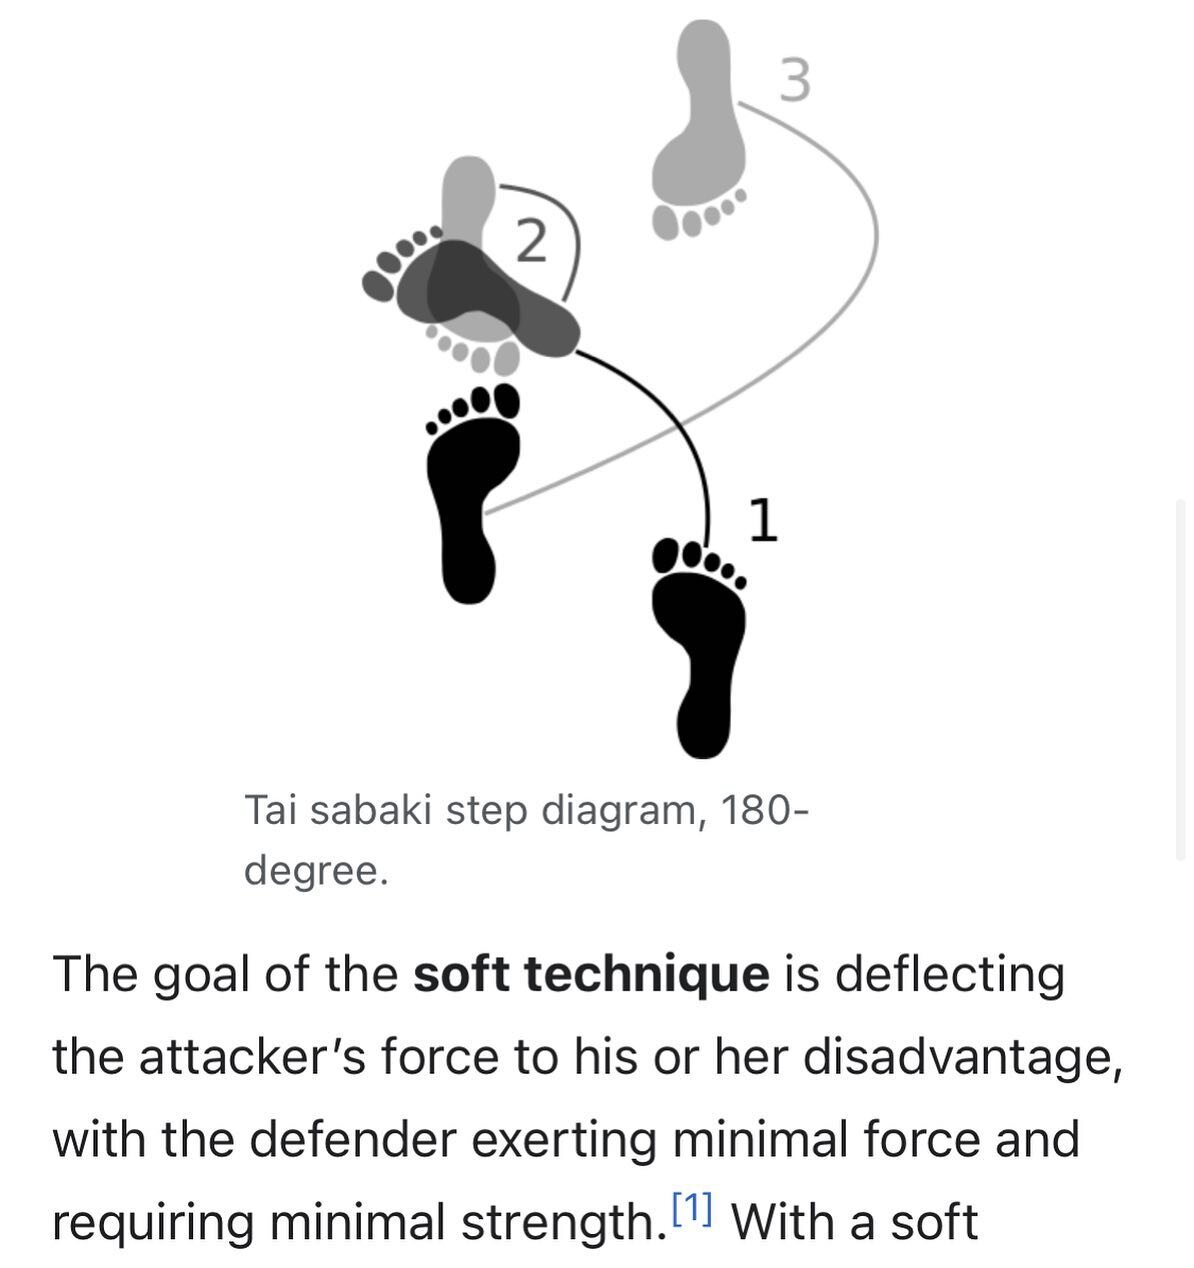 The instinct to match aggression with equal force is normal, but boy is it ever ineffective. What an art to be able to respond to an attack by softening and diffusing the attacker&rsquo;s energy without exerting much of your own.  I picture a nuclear